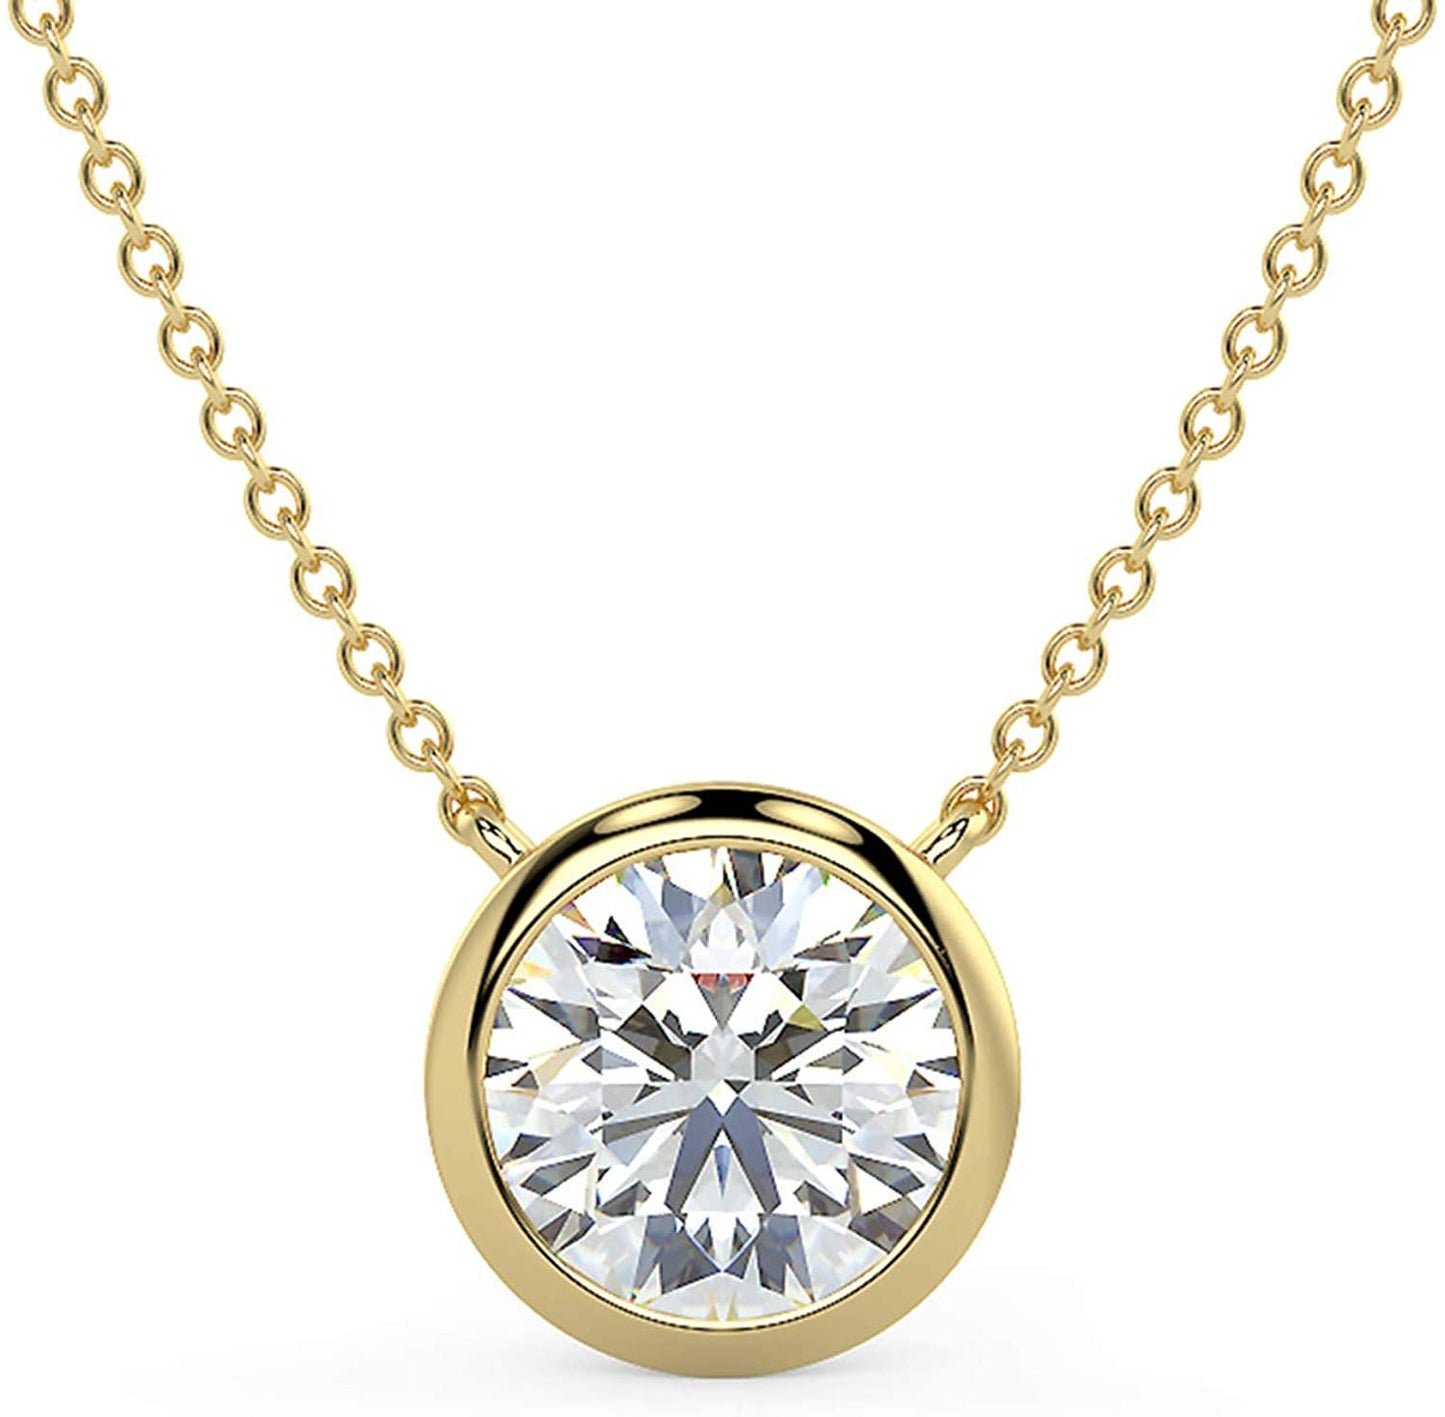 IGI Certified 14K Gold 1.0 or 1-1/2 Carat Round Brilliant-Cut Lab Created Diamond Bezel-Set Solitaire Pendant Necklace (J-K Color, SI2-I1 Clarity), 18" - Choice of Gold Color